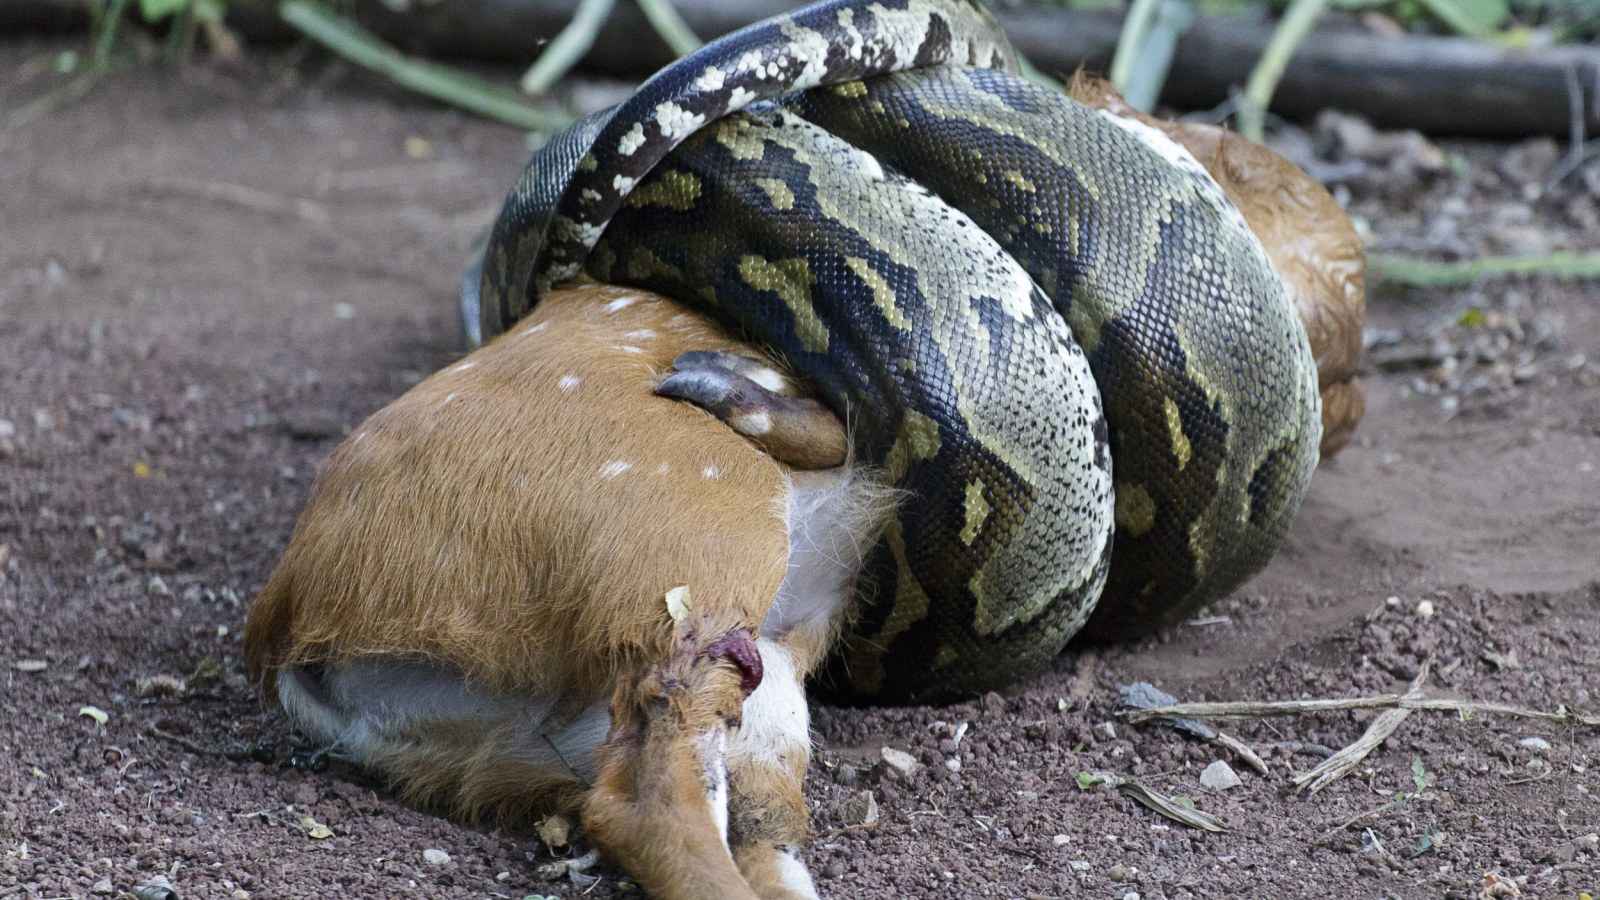 Snake Kills Bigger Snakes With World's Most Powerful Squeeze